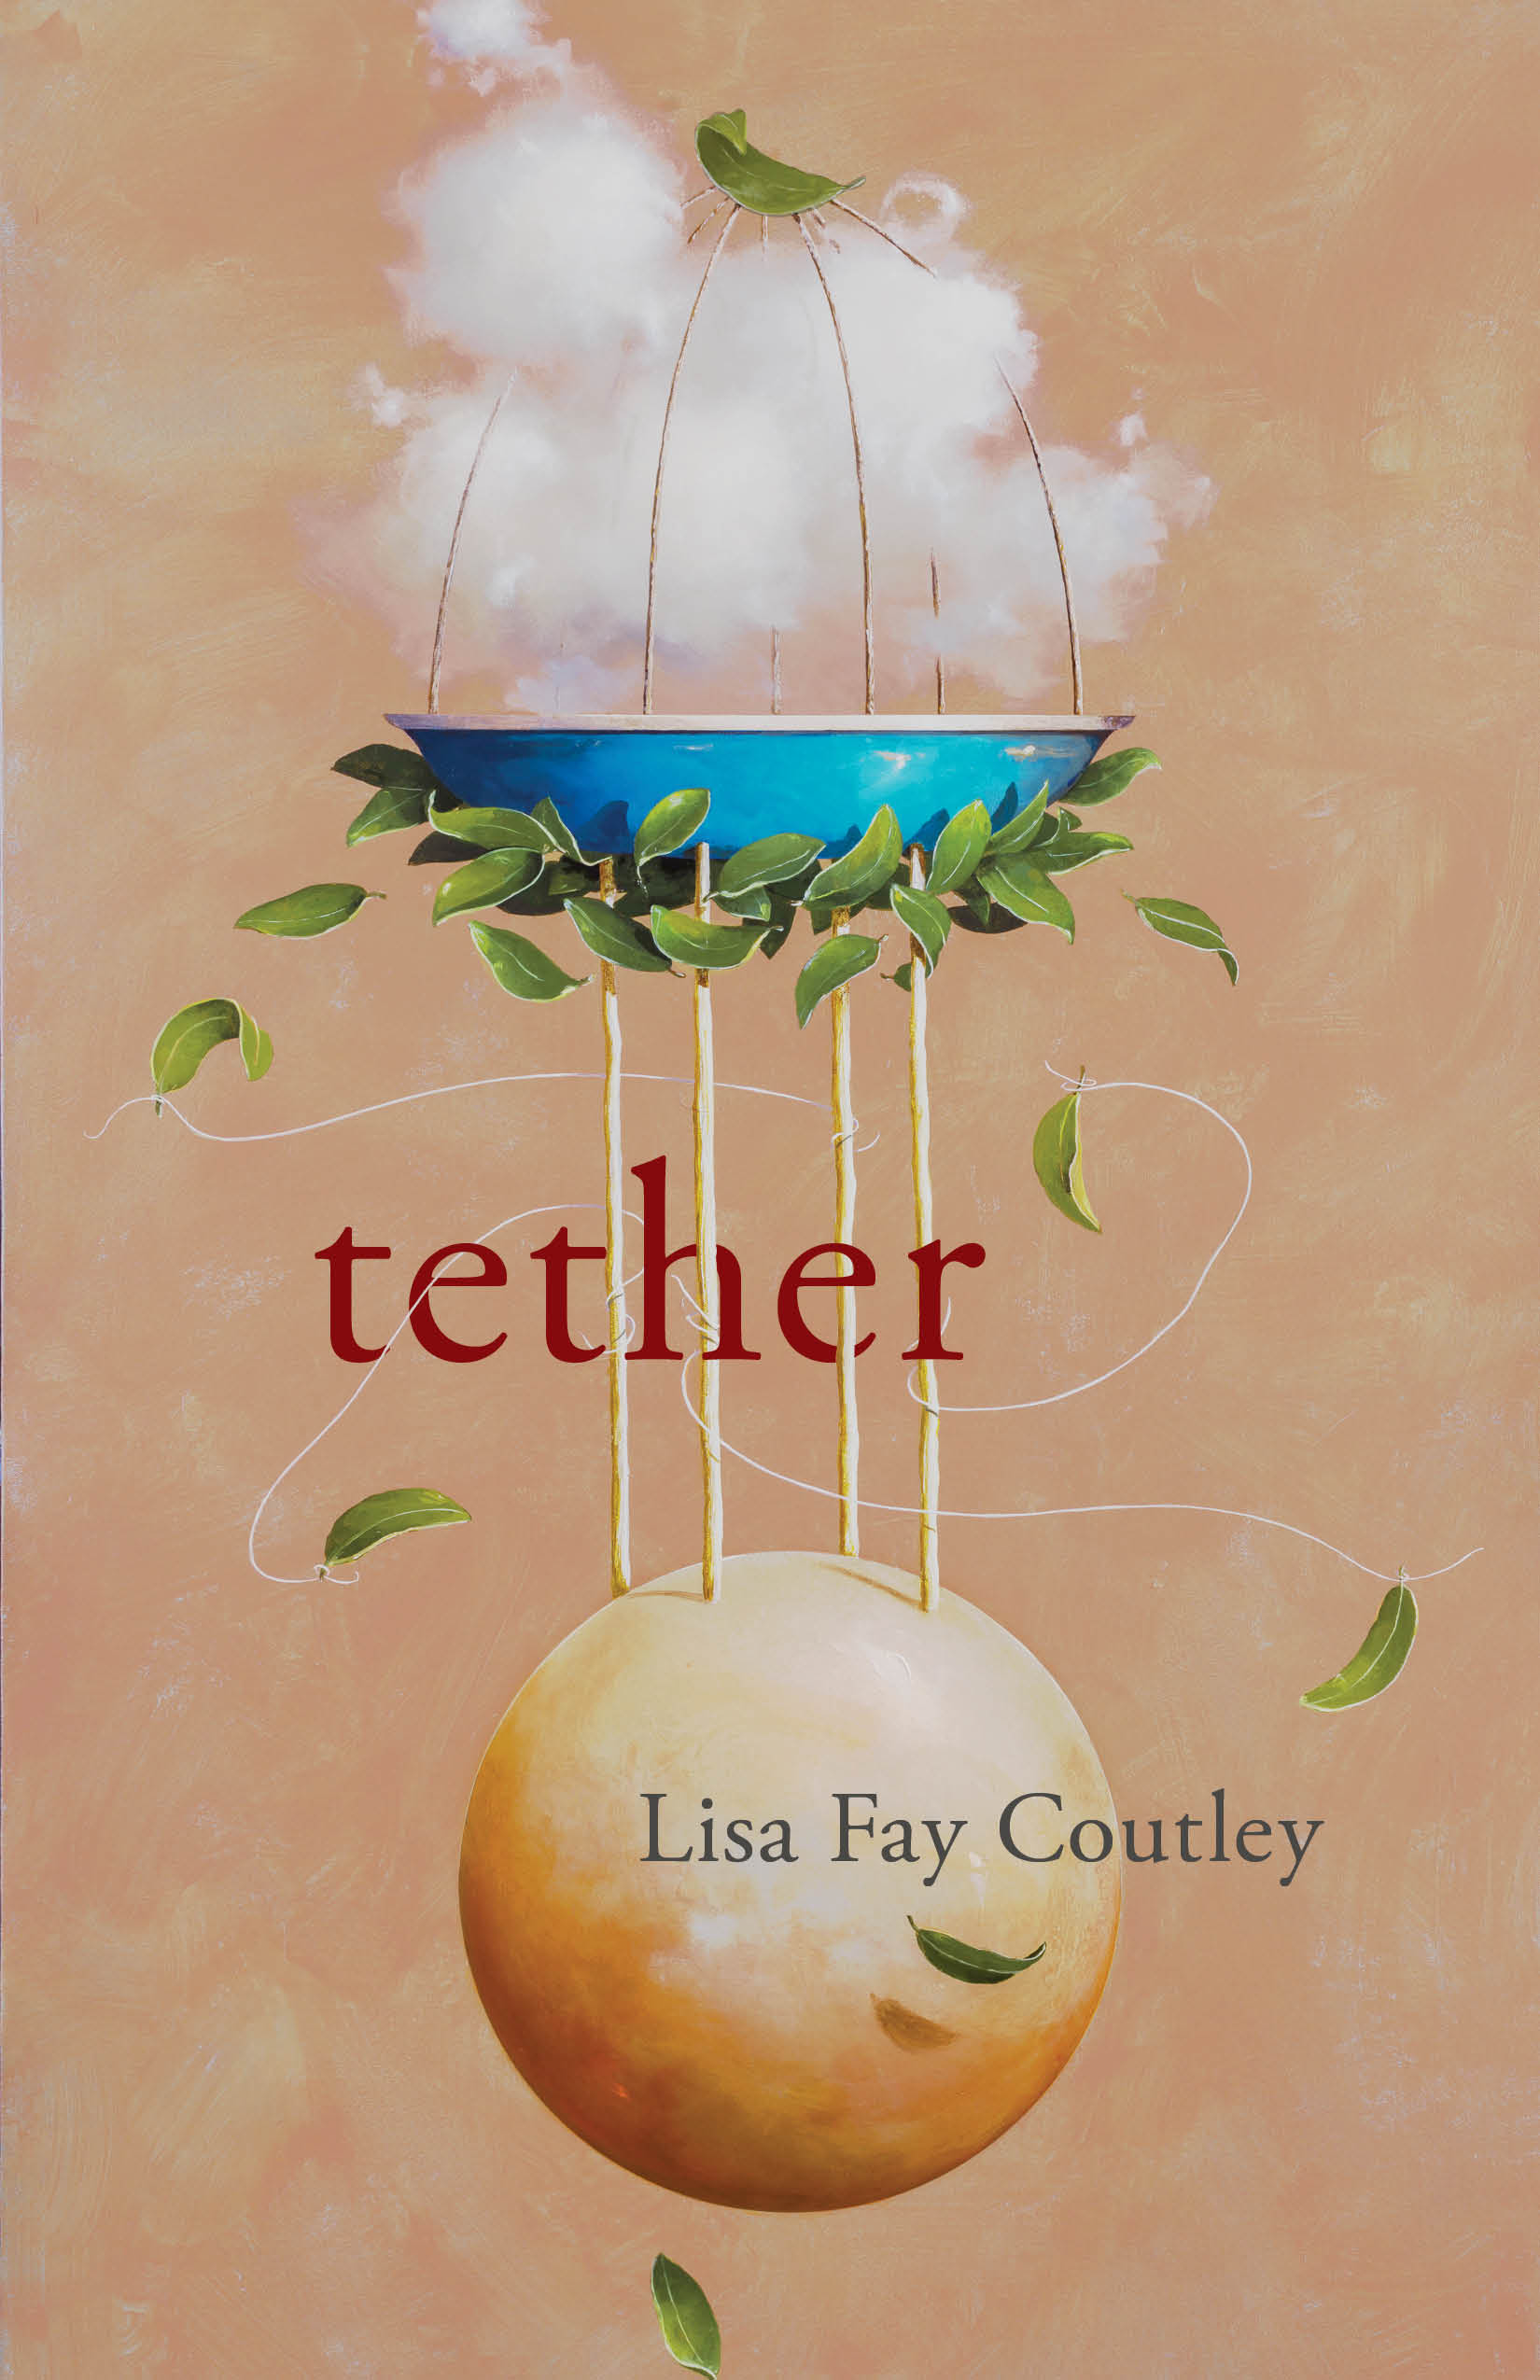 Book cover of Tether by Lisa Fay Coutley